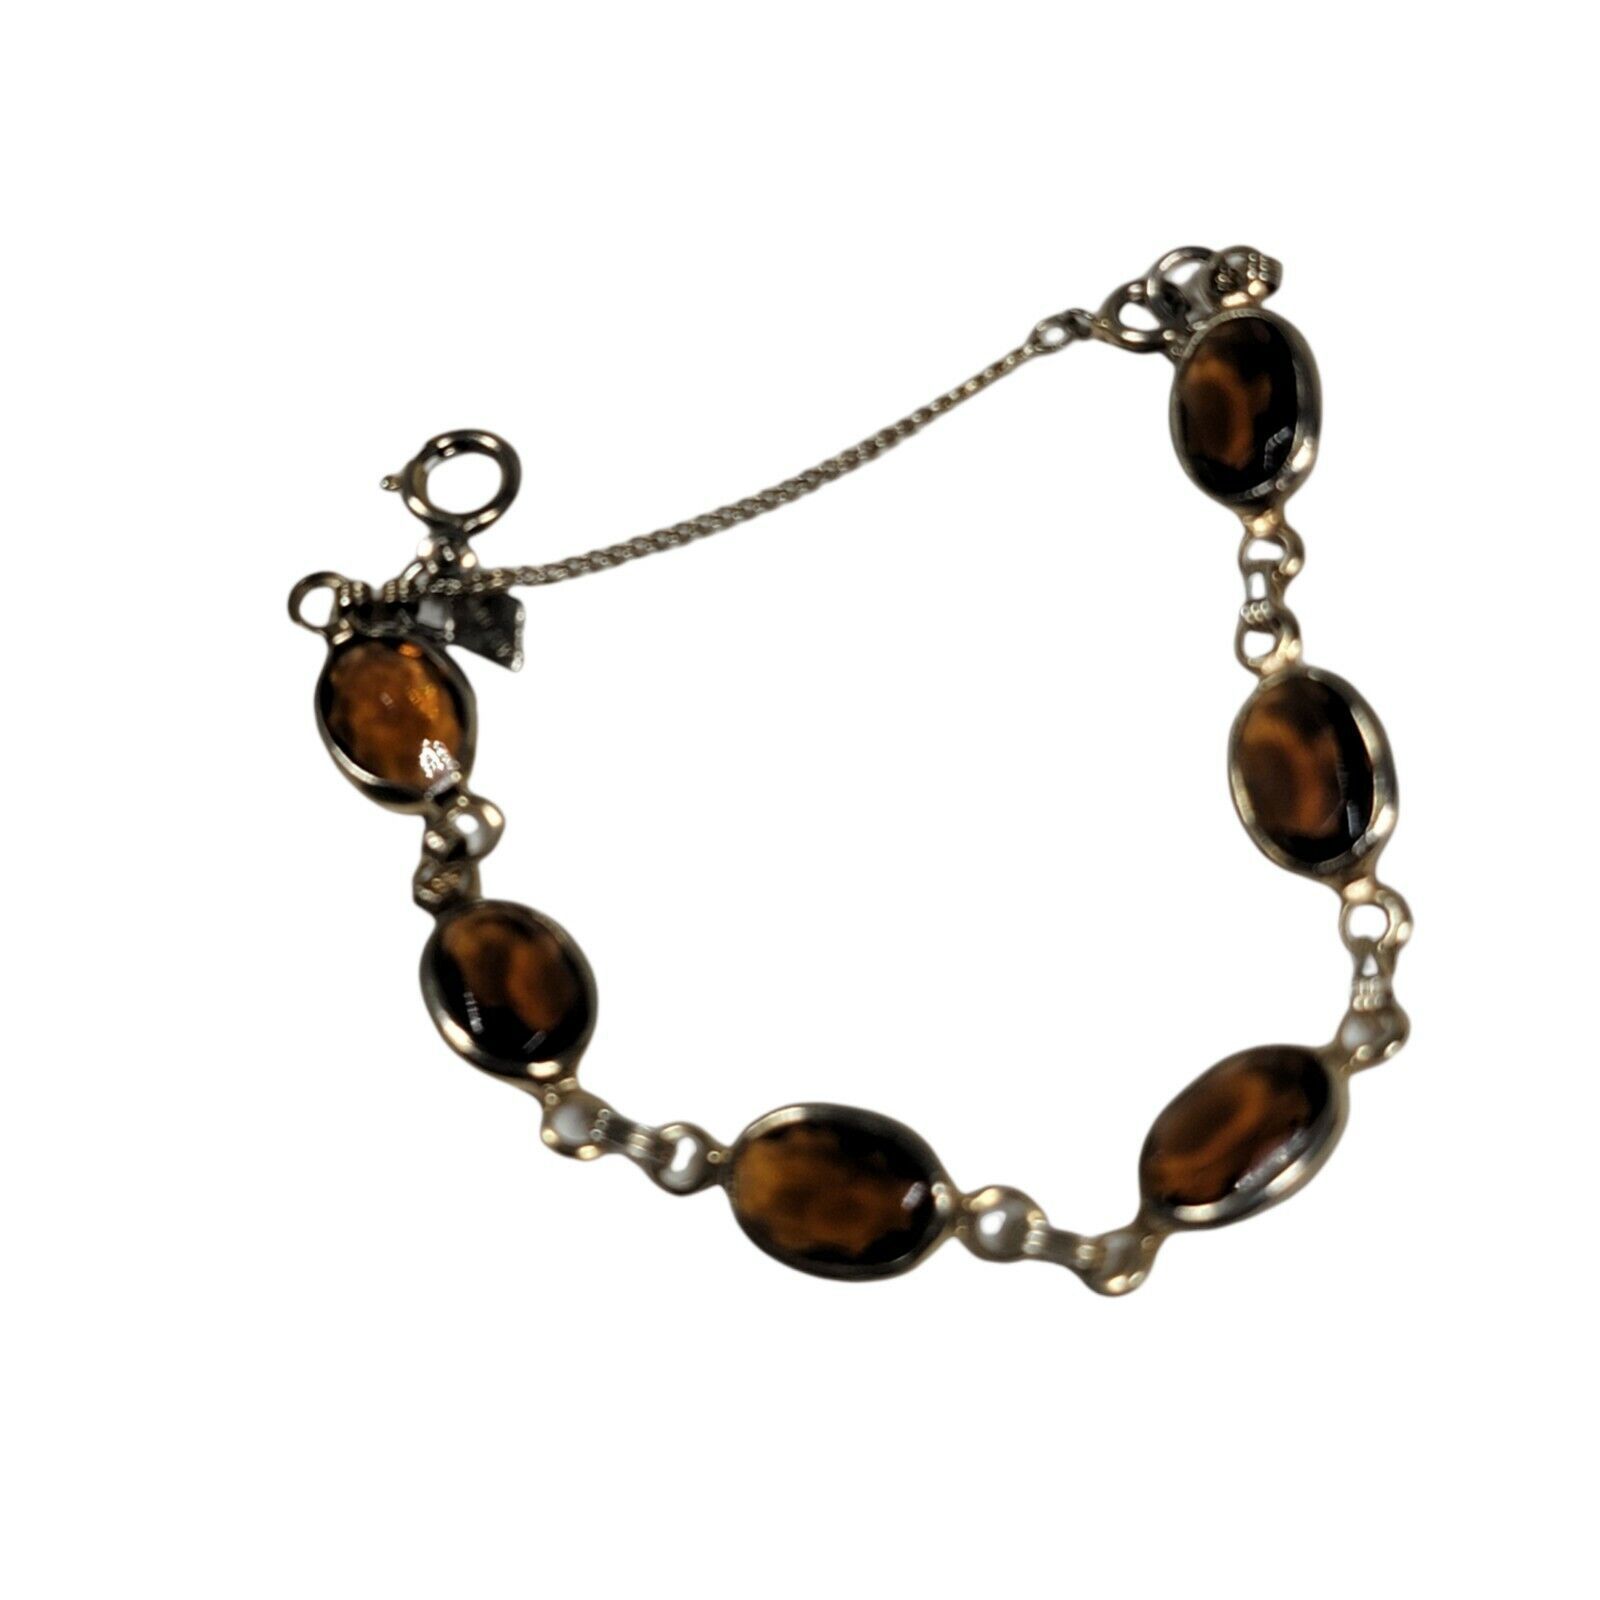 Primary image for Vintage Gold Tone and Amber Lucite Bracelet with Safety Chain Signed Sarah Cov